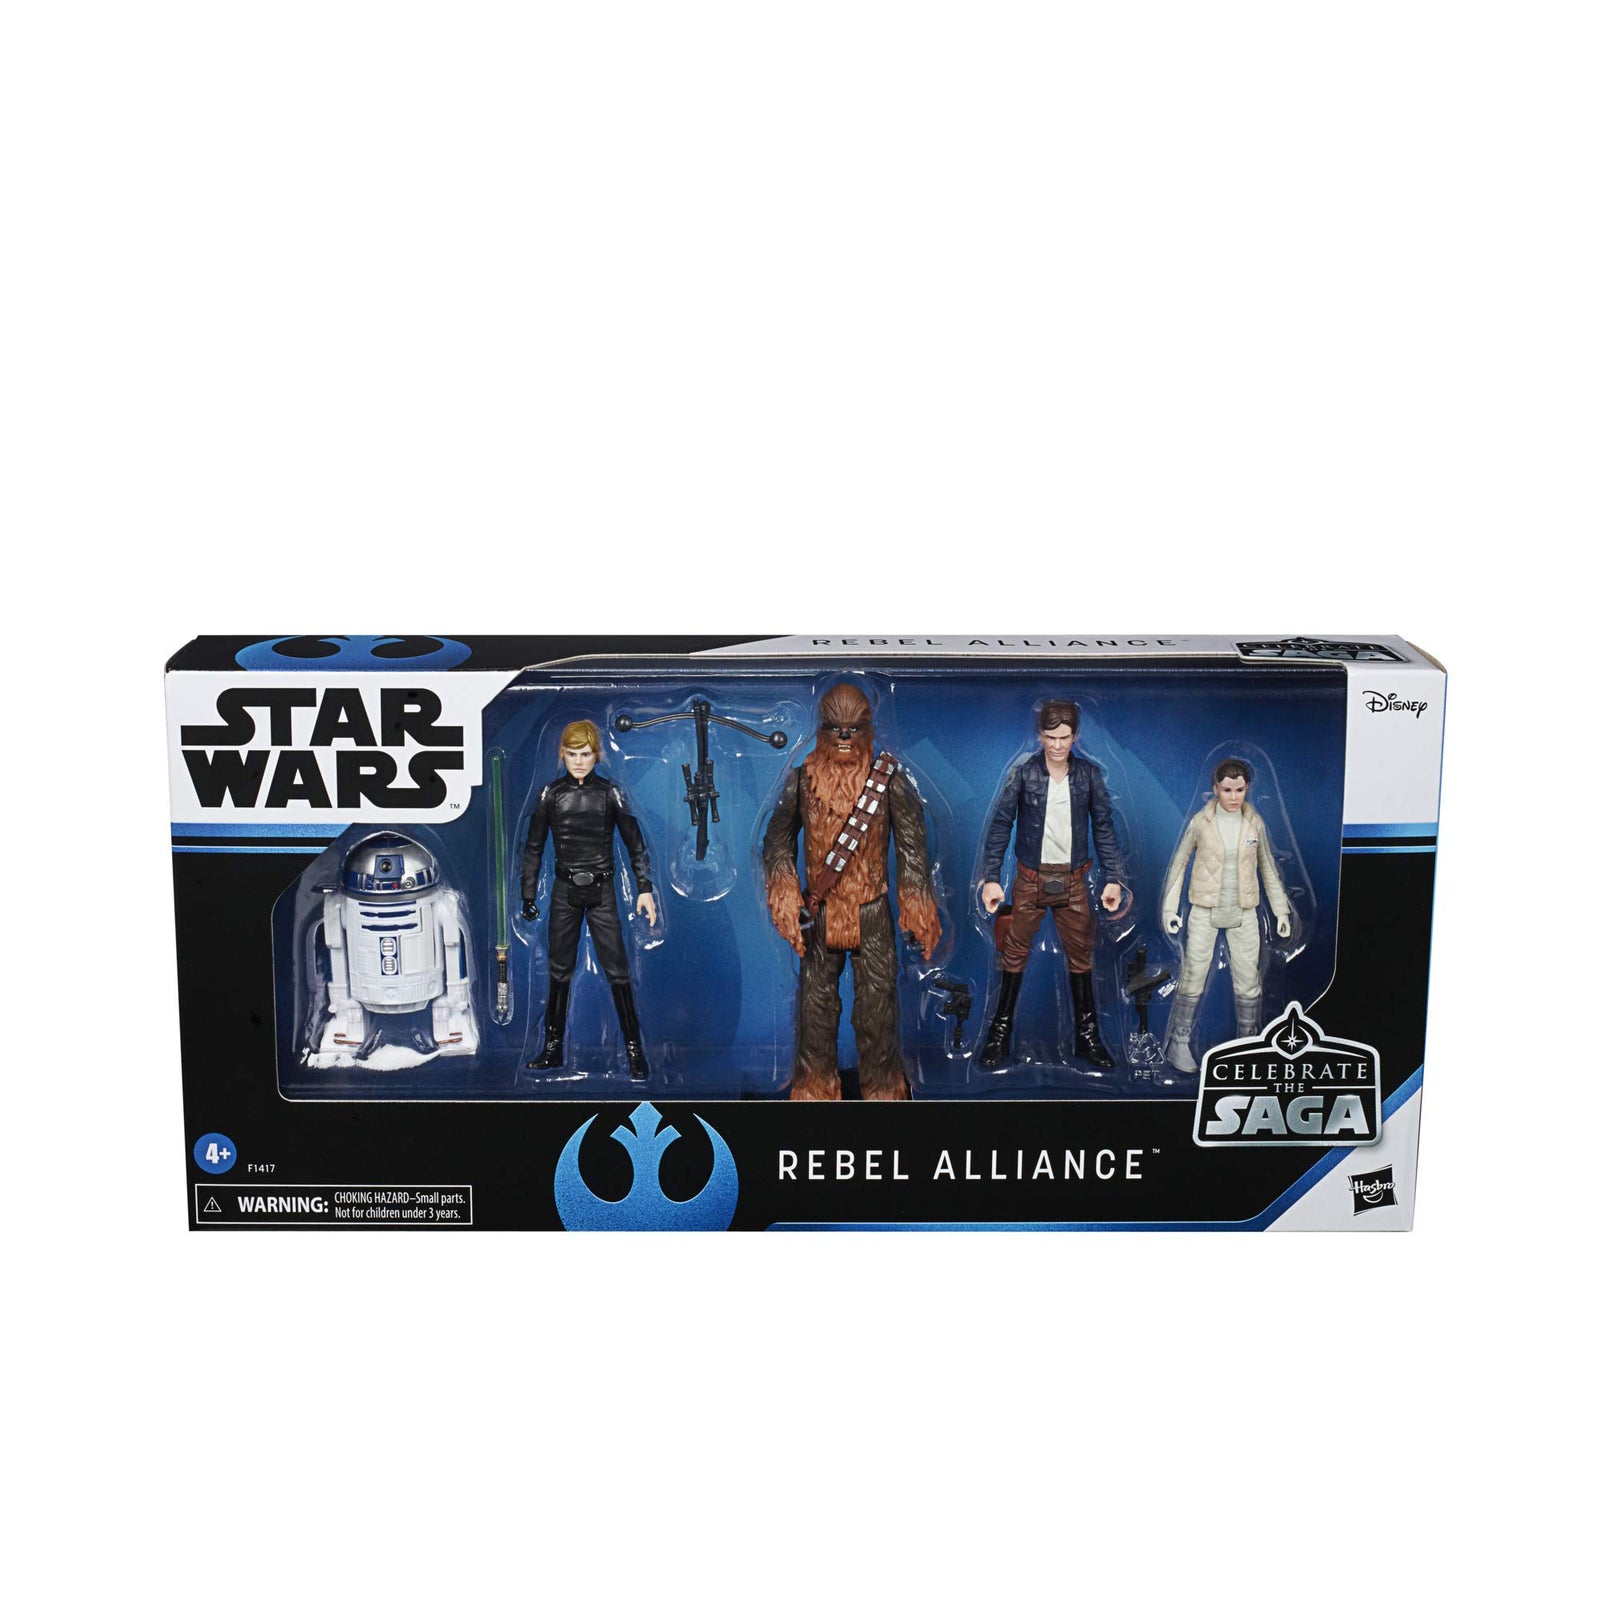 Star Wars Celebrate The Saga Toys Rebel Alliance Figure Set, 3.75-Inch-Scale Collectible Action Figure 5-Pack (Amazon Exclusive)